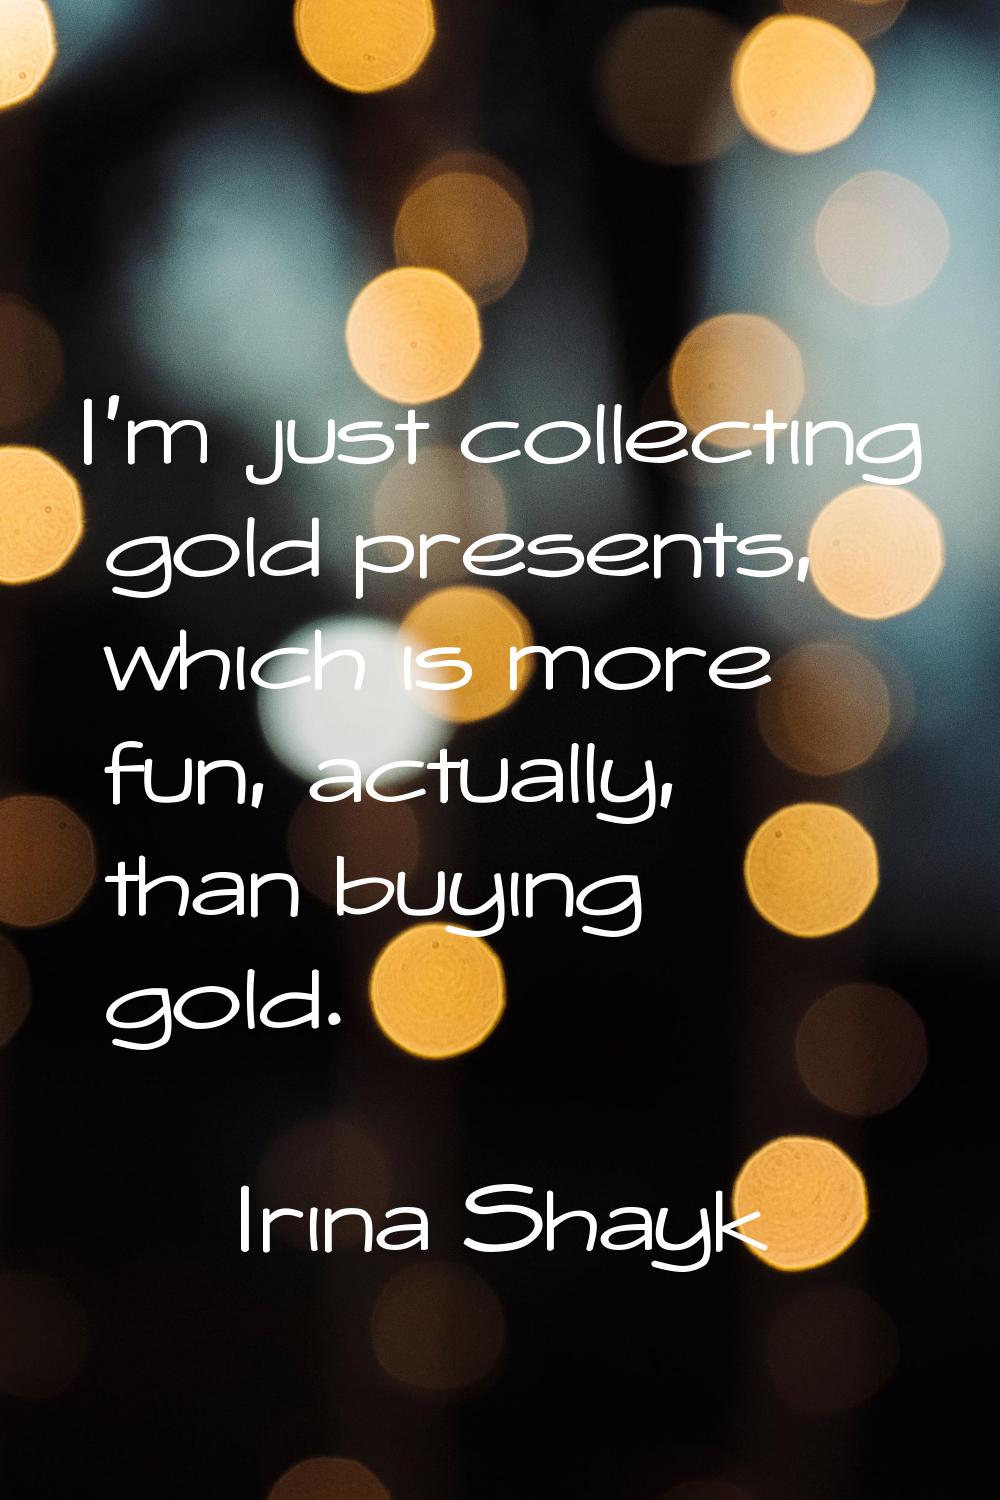 I'm just collecting gold presents, which is more fun, actually, than buying gold.